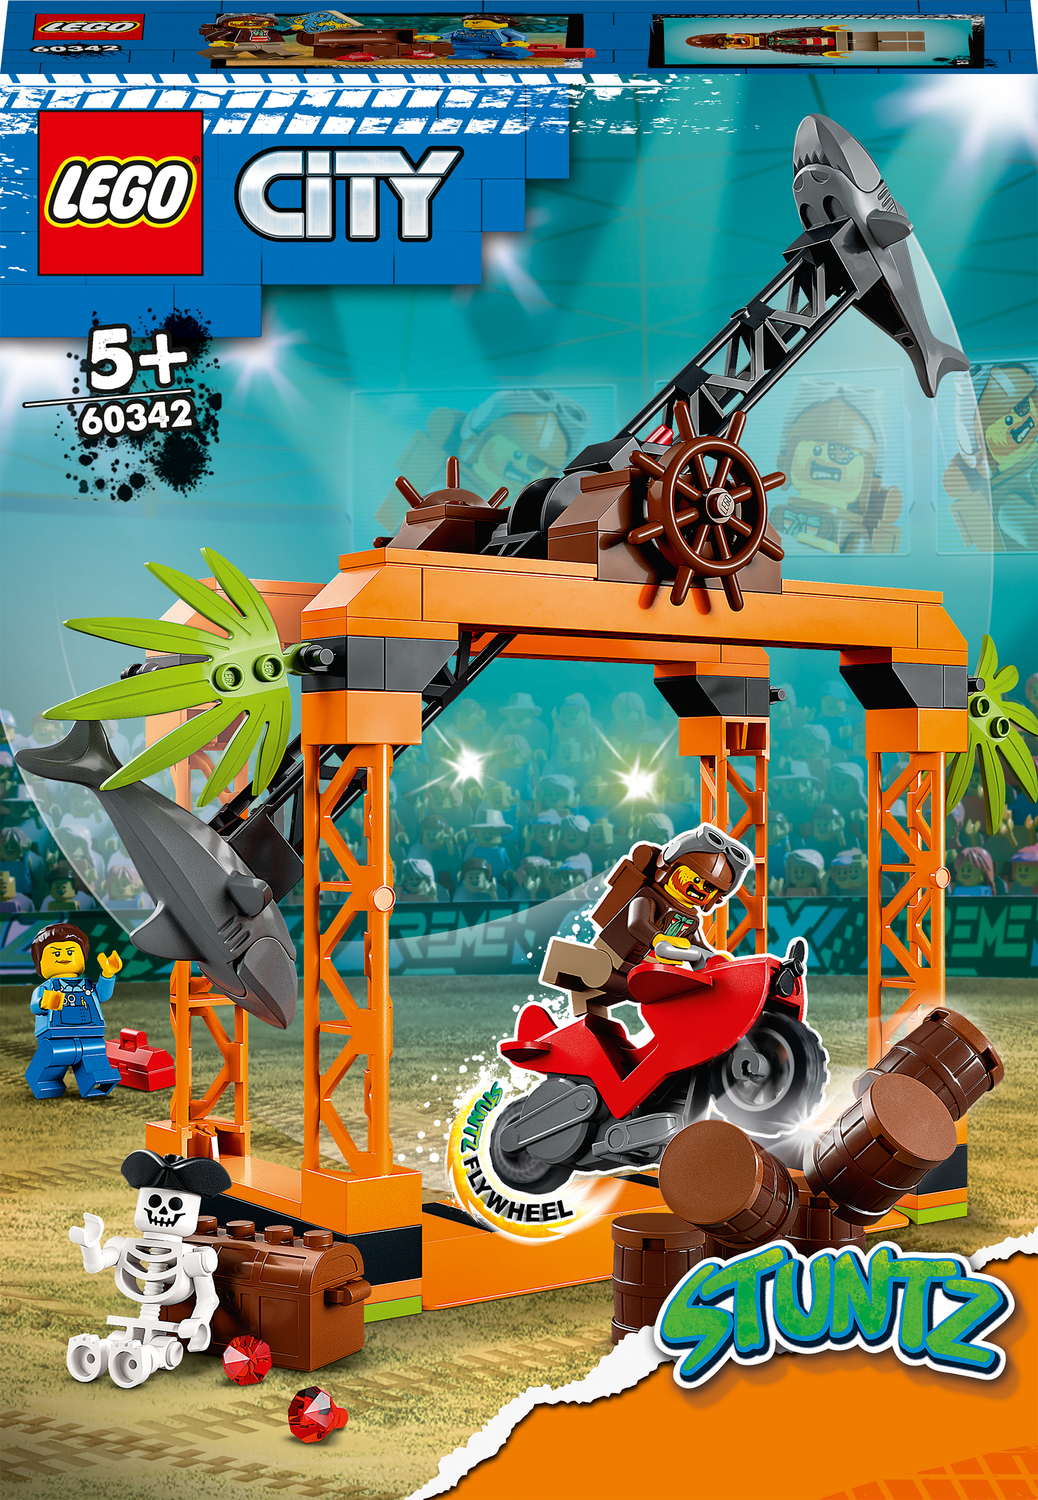 LEGO City Stuntz 2023 sets reviewed - did they get better this year? 